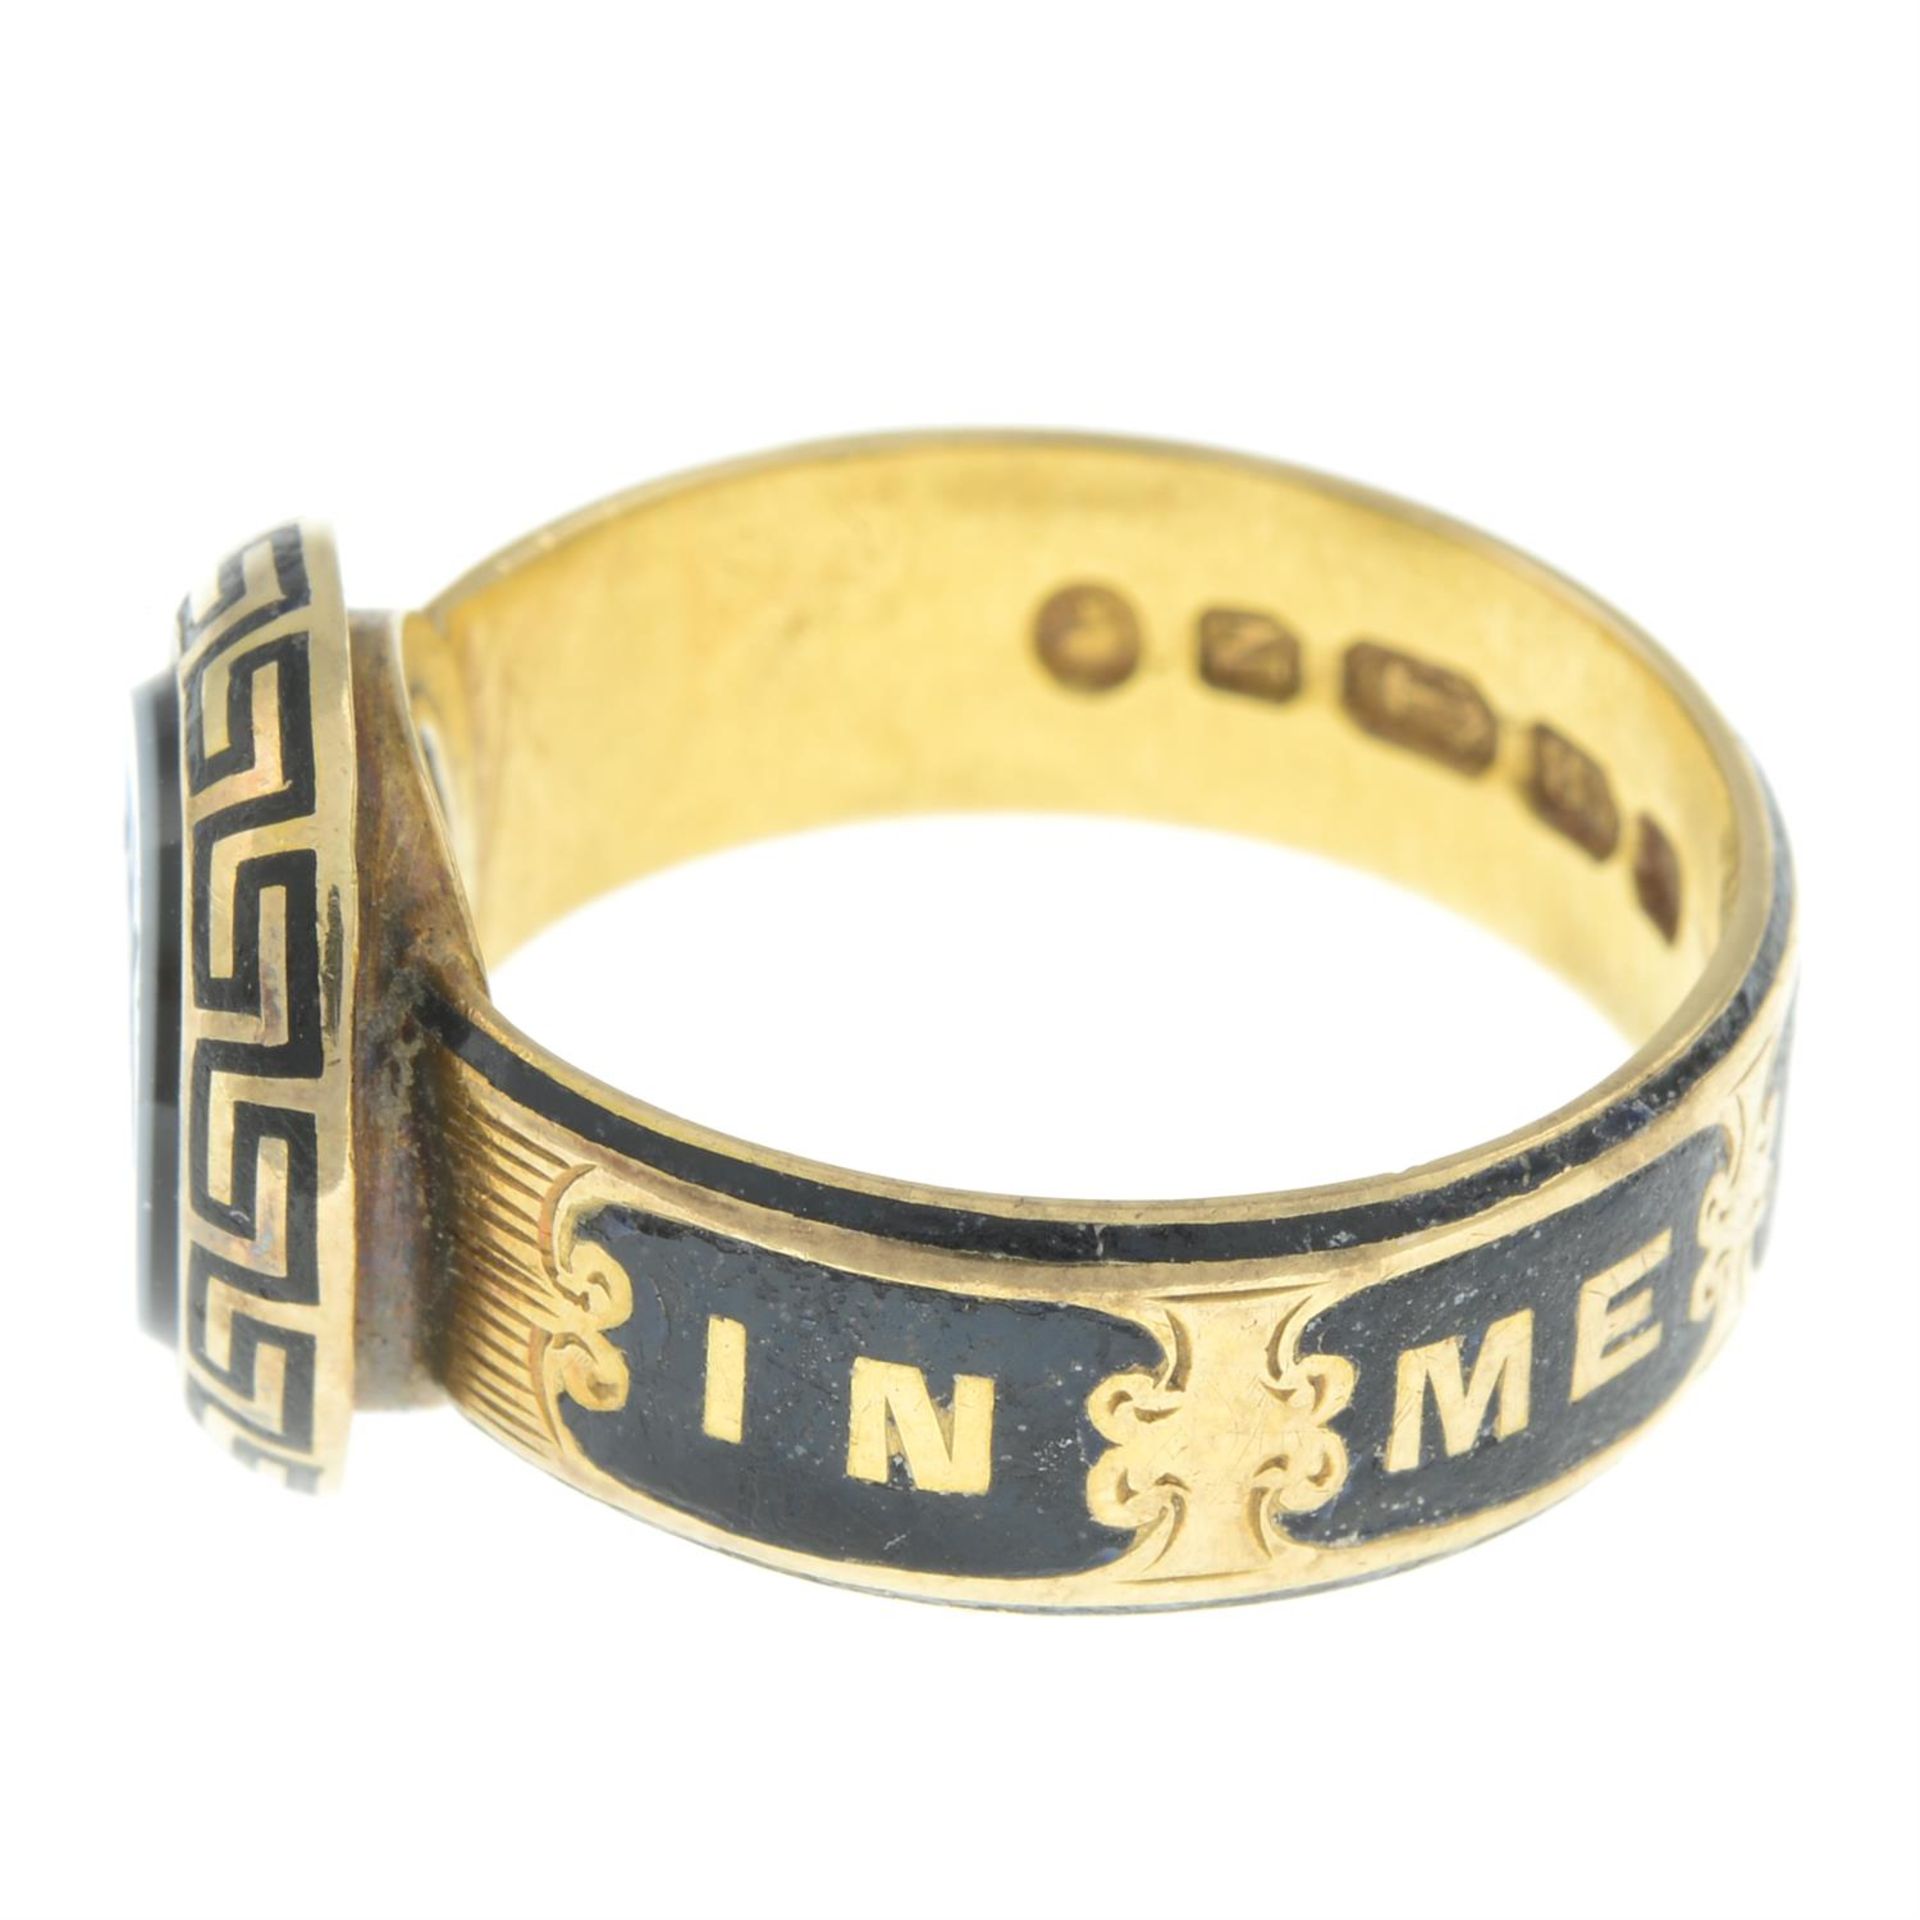 Victorian 18ct gold onyx & enamel mourning ring - Image 2 of 4